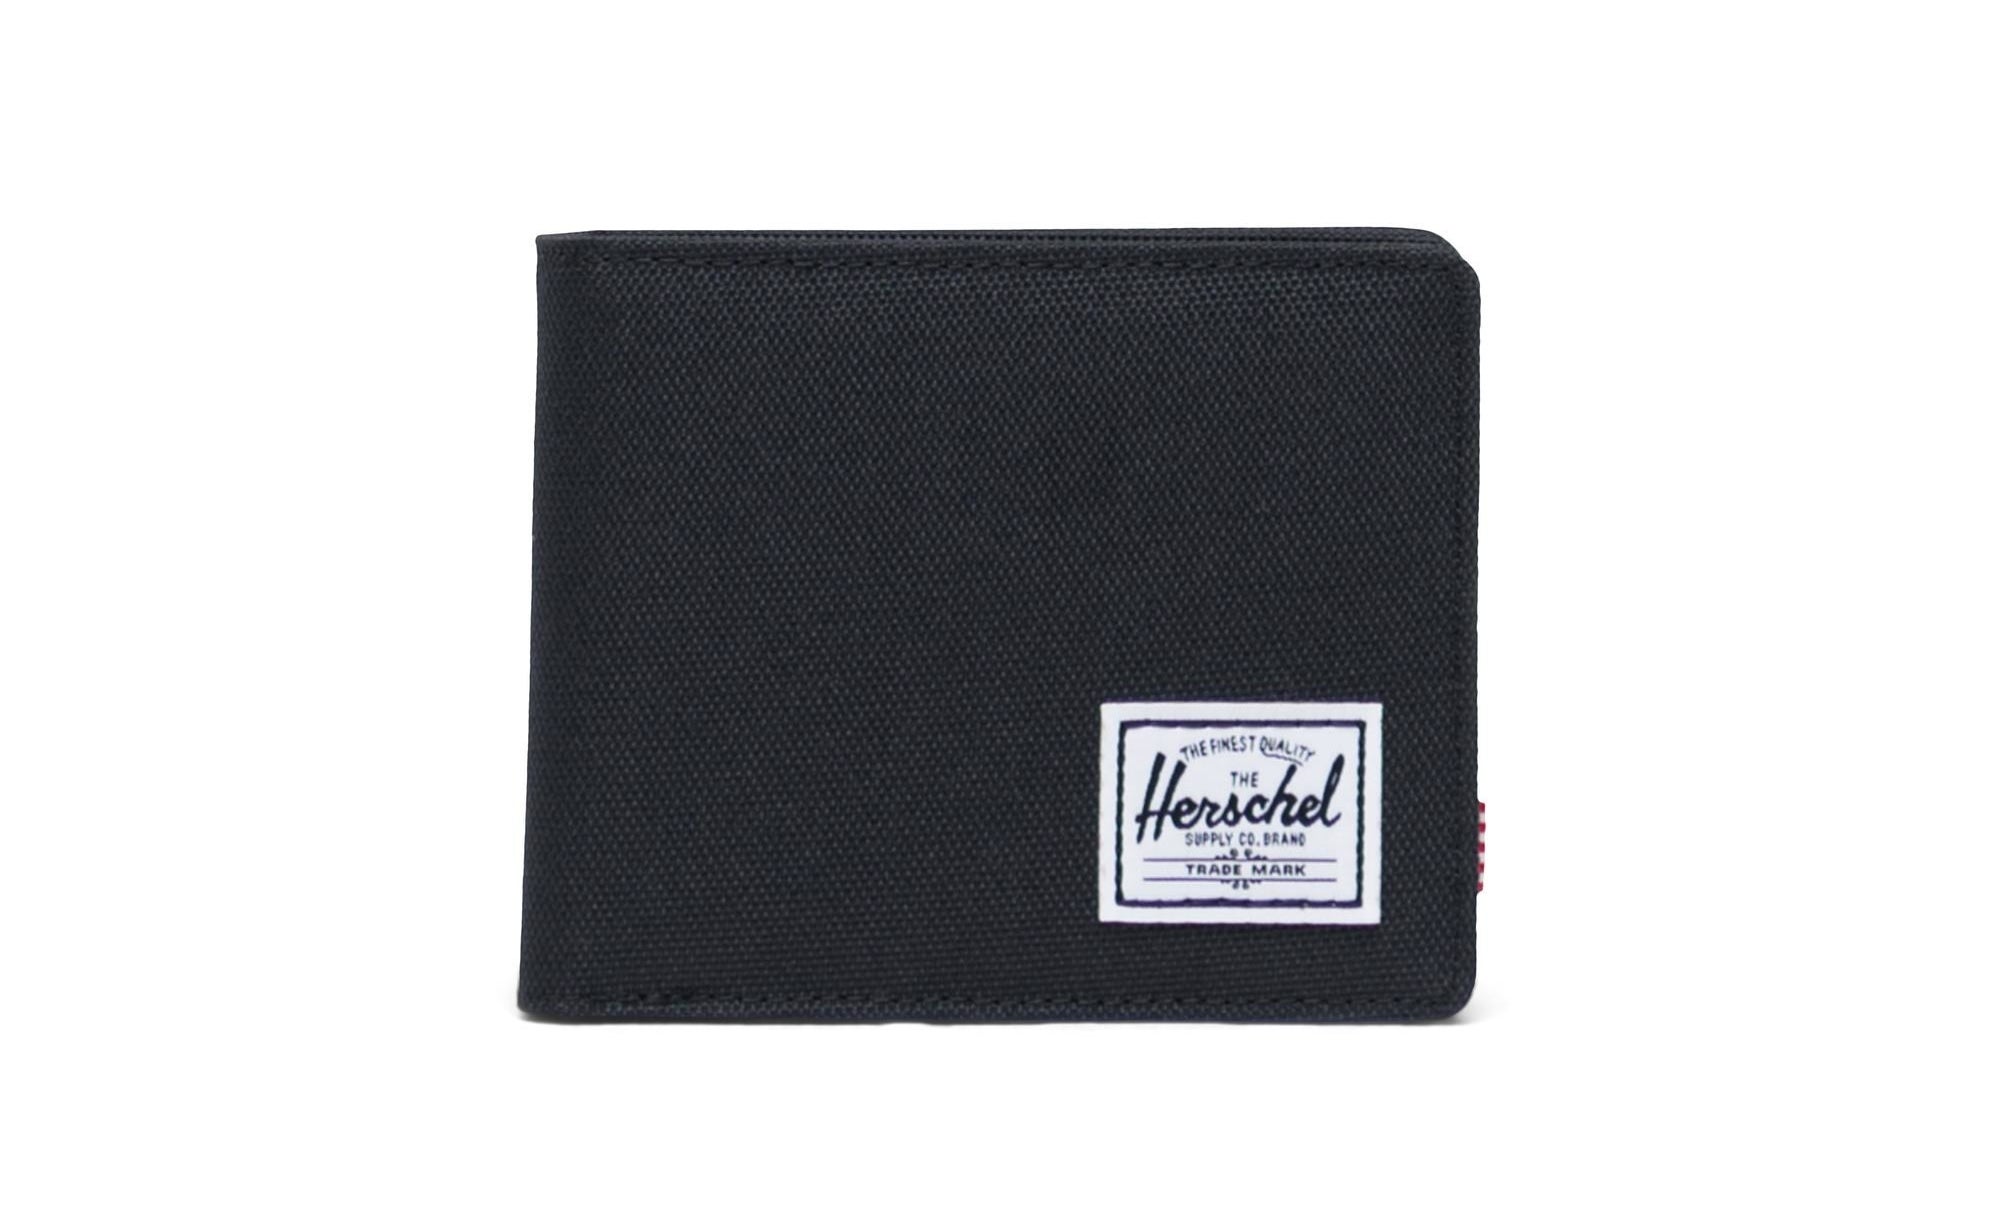 A wallet on a plain background